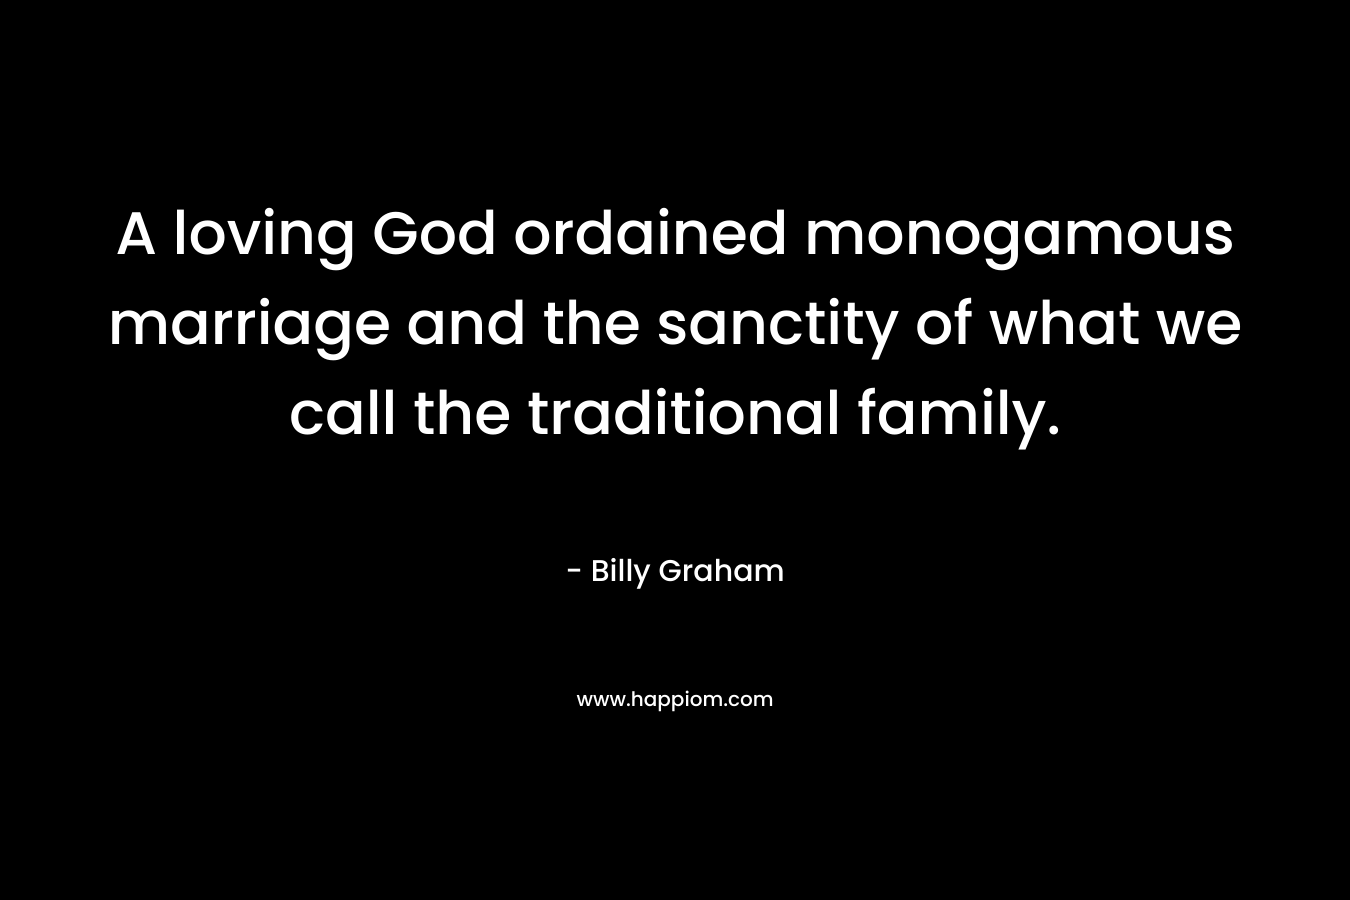 A loving God ordained monogamous marriage and the sanctity of what we call the traditional family. – Billy Graham